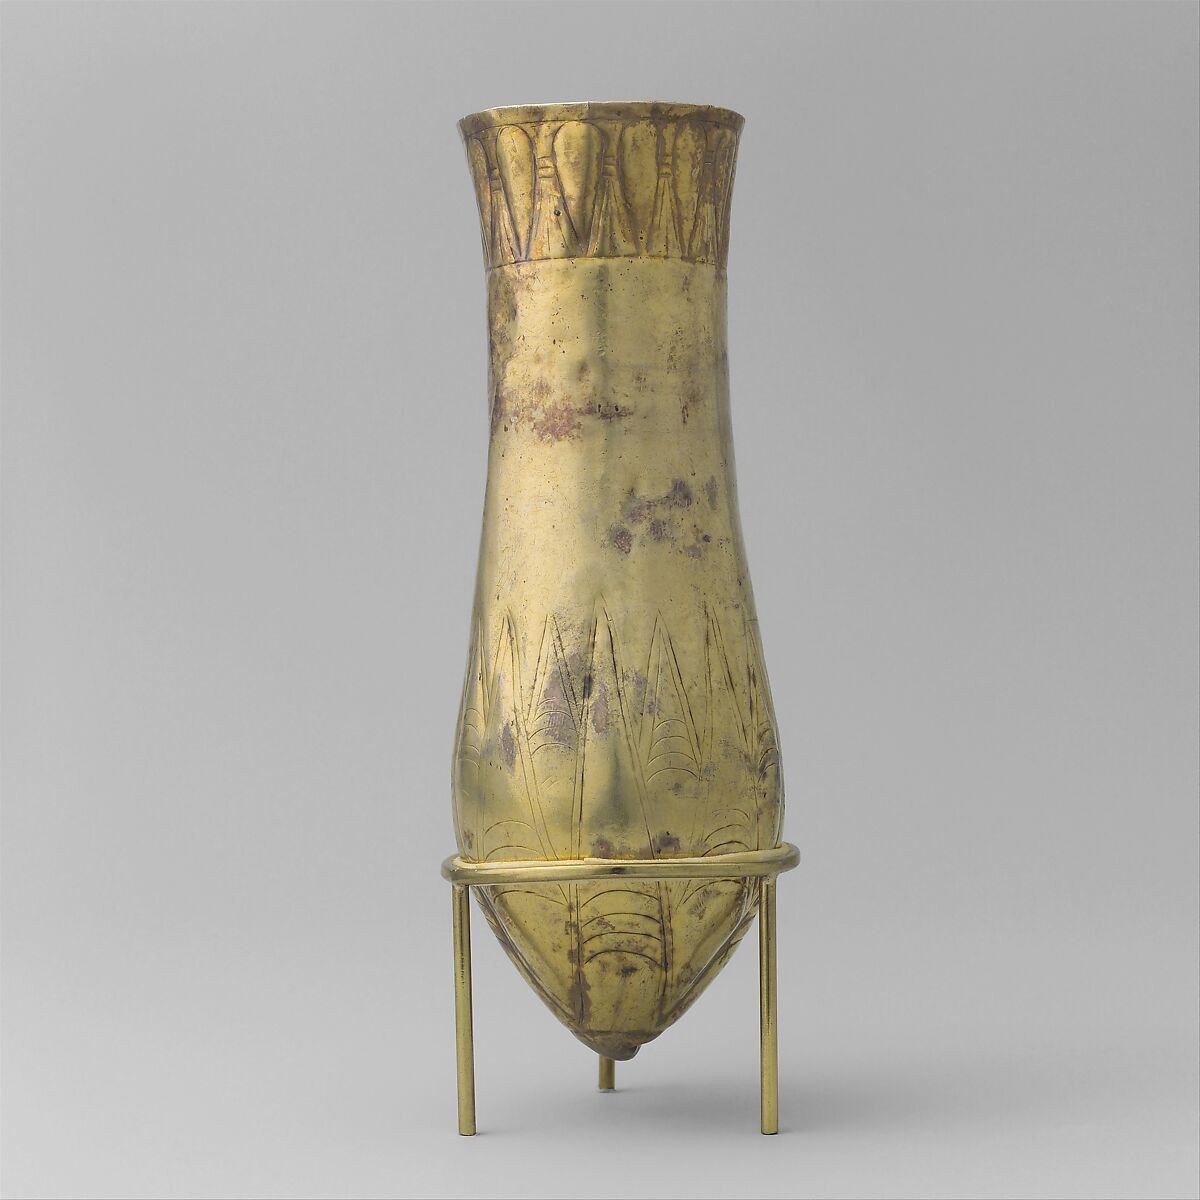 Situla with floral decoration, Electrum 